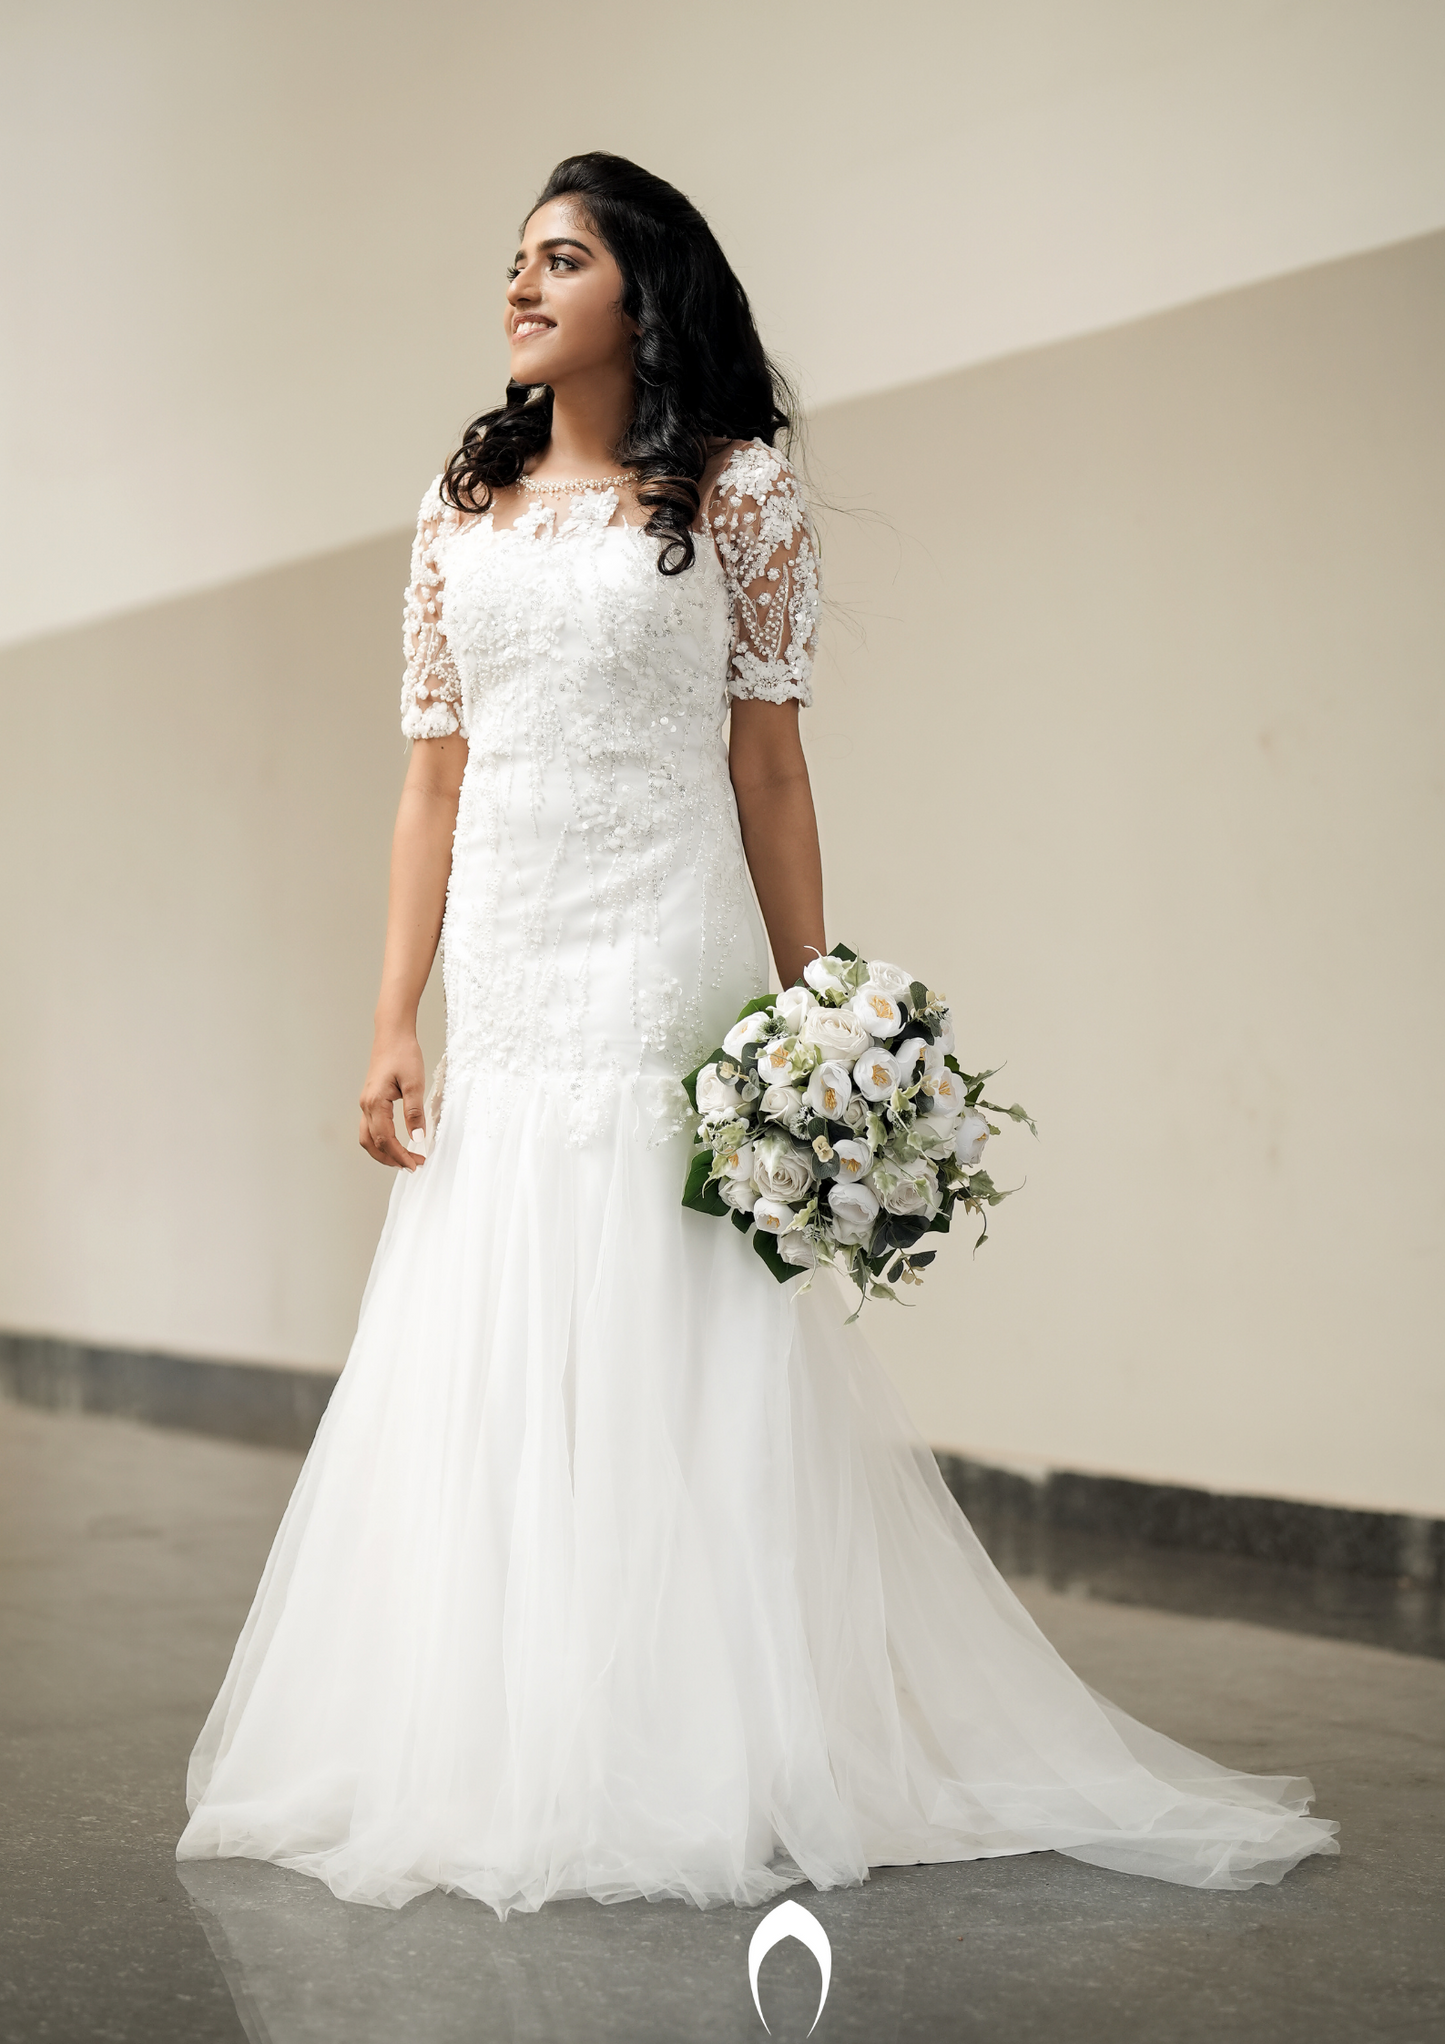 Signature Christian bridal mermaid gown carried by bride Mekha